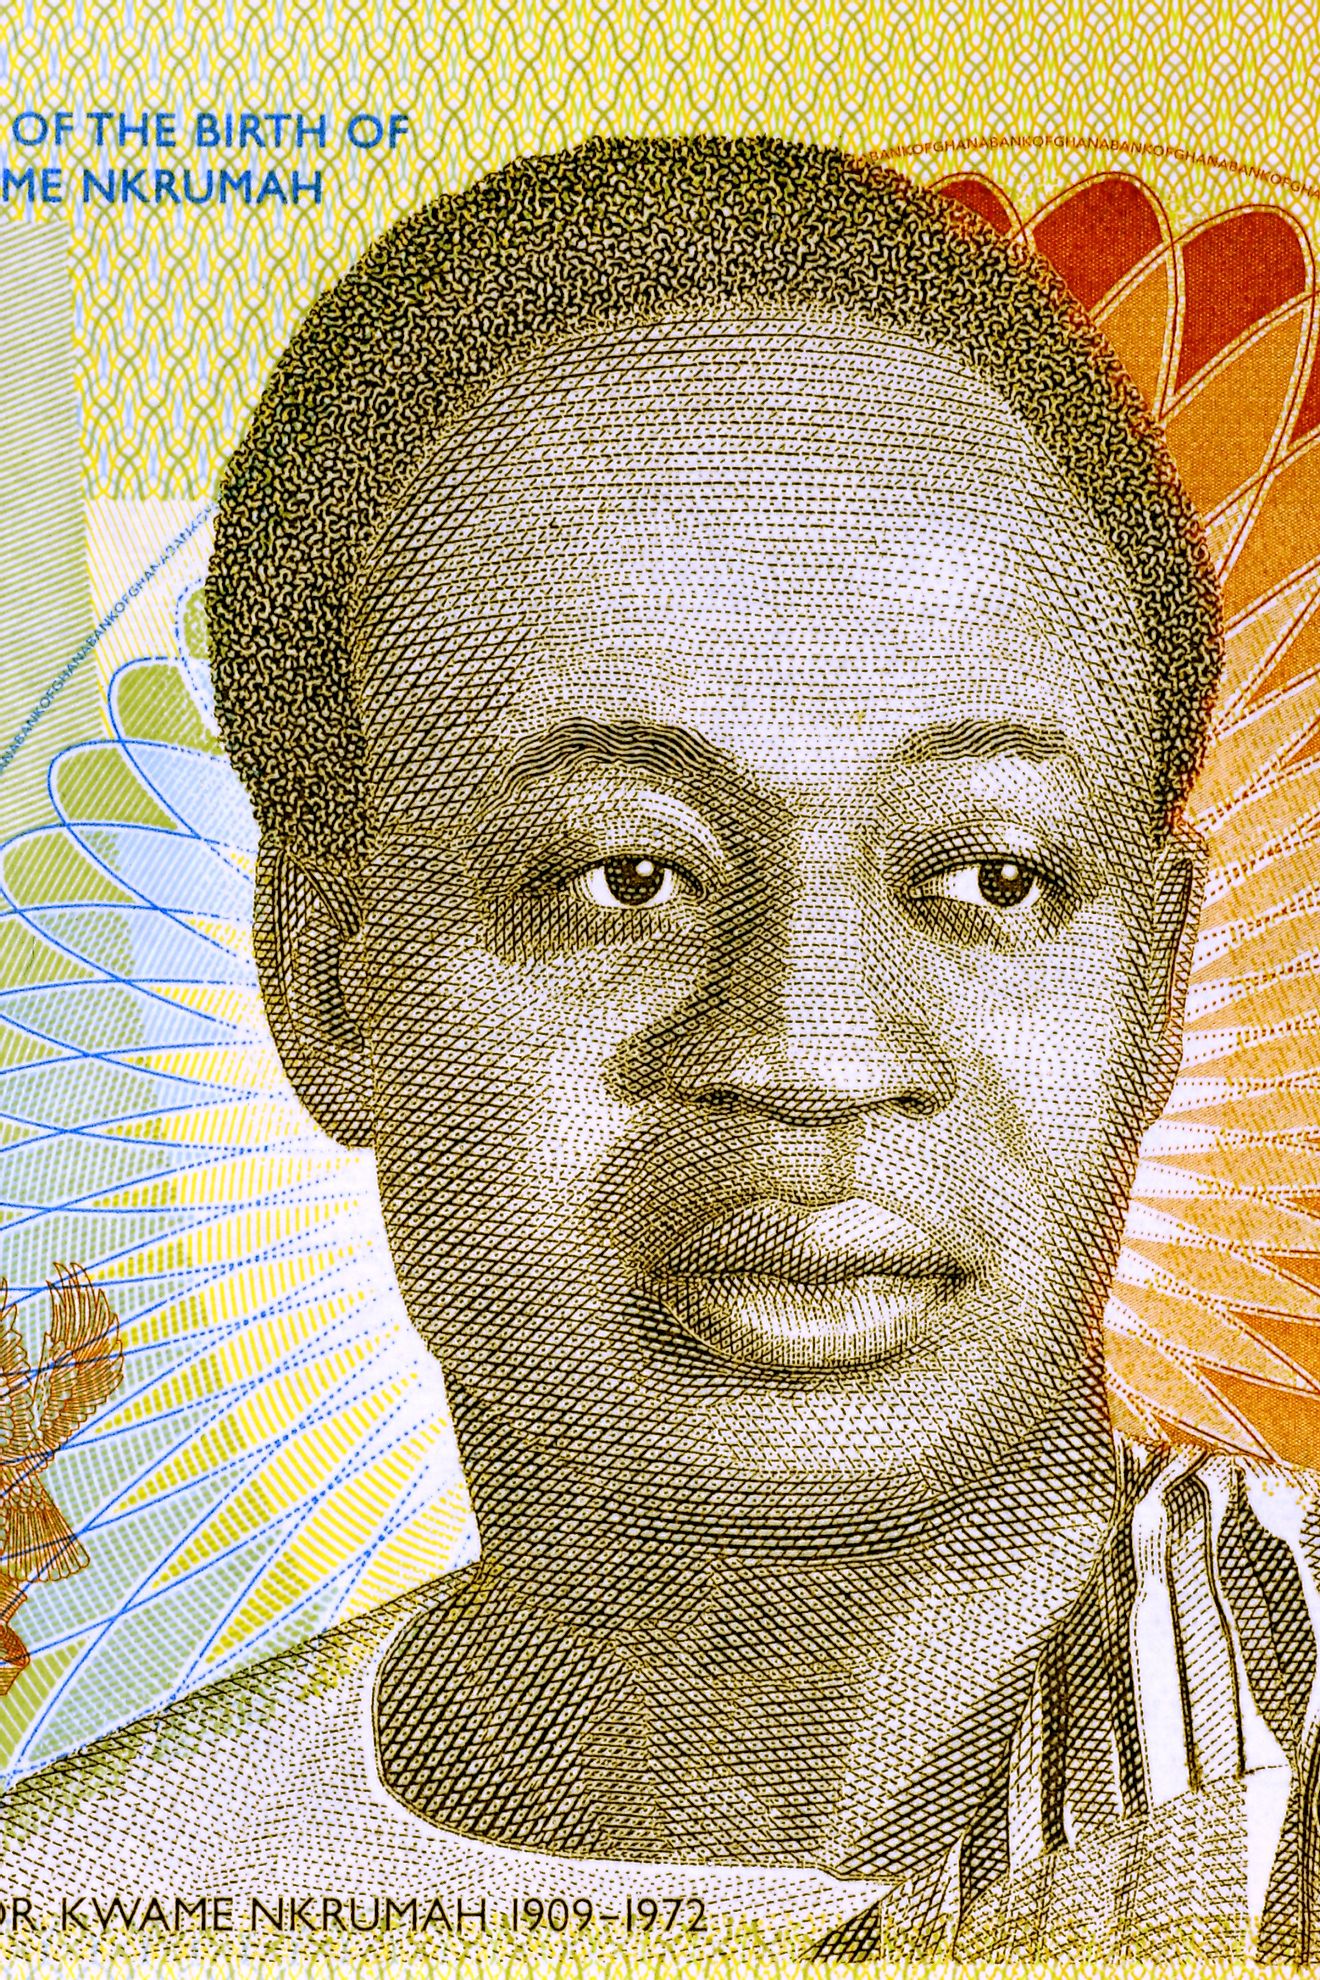 Kwame Nkrumah was the foremost figure in Ghana's successful effort to gain independence from Britain, and is as controversial as he was important.